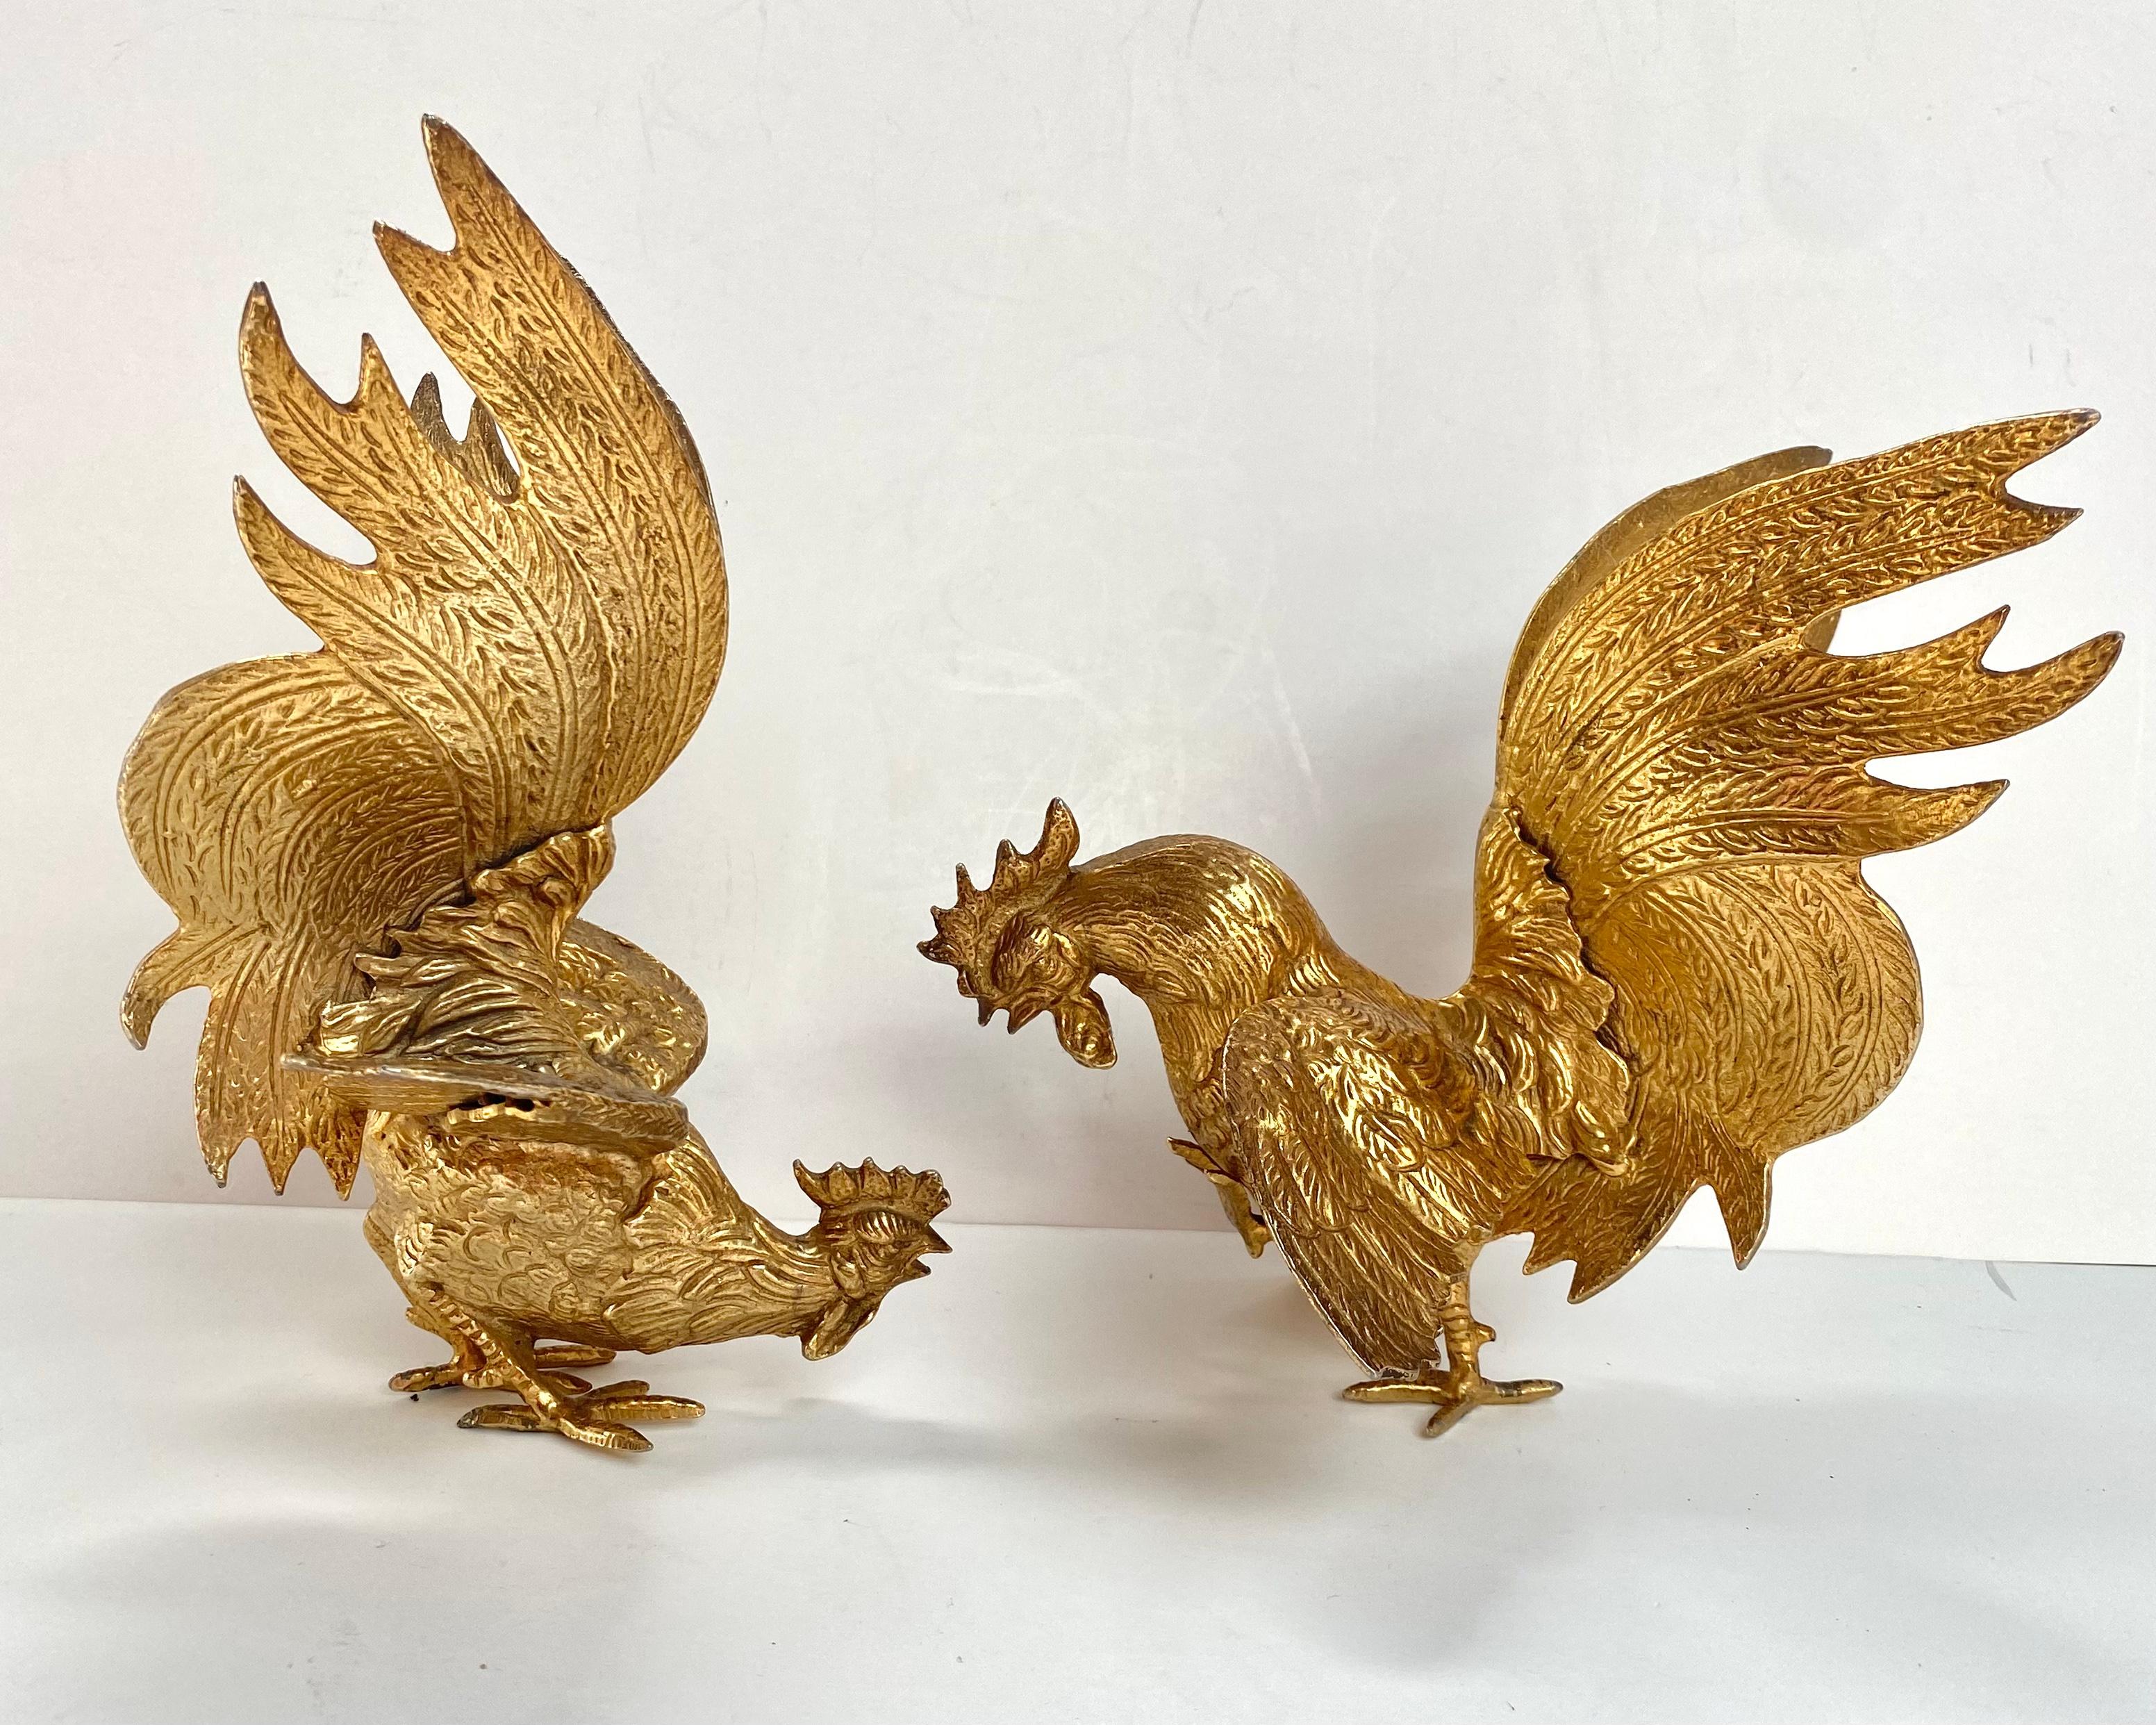 Majestic Gilt Brass Rooster Cock Figurines, Set 2, France, 1960s.

Highly detailed gilded brass rooster figurines.

Vintage figurines have a classic design and are handmade from natural and sustainable material which is resistant to impacts,